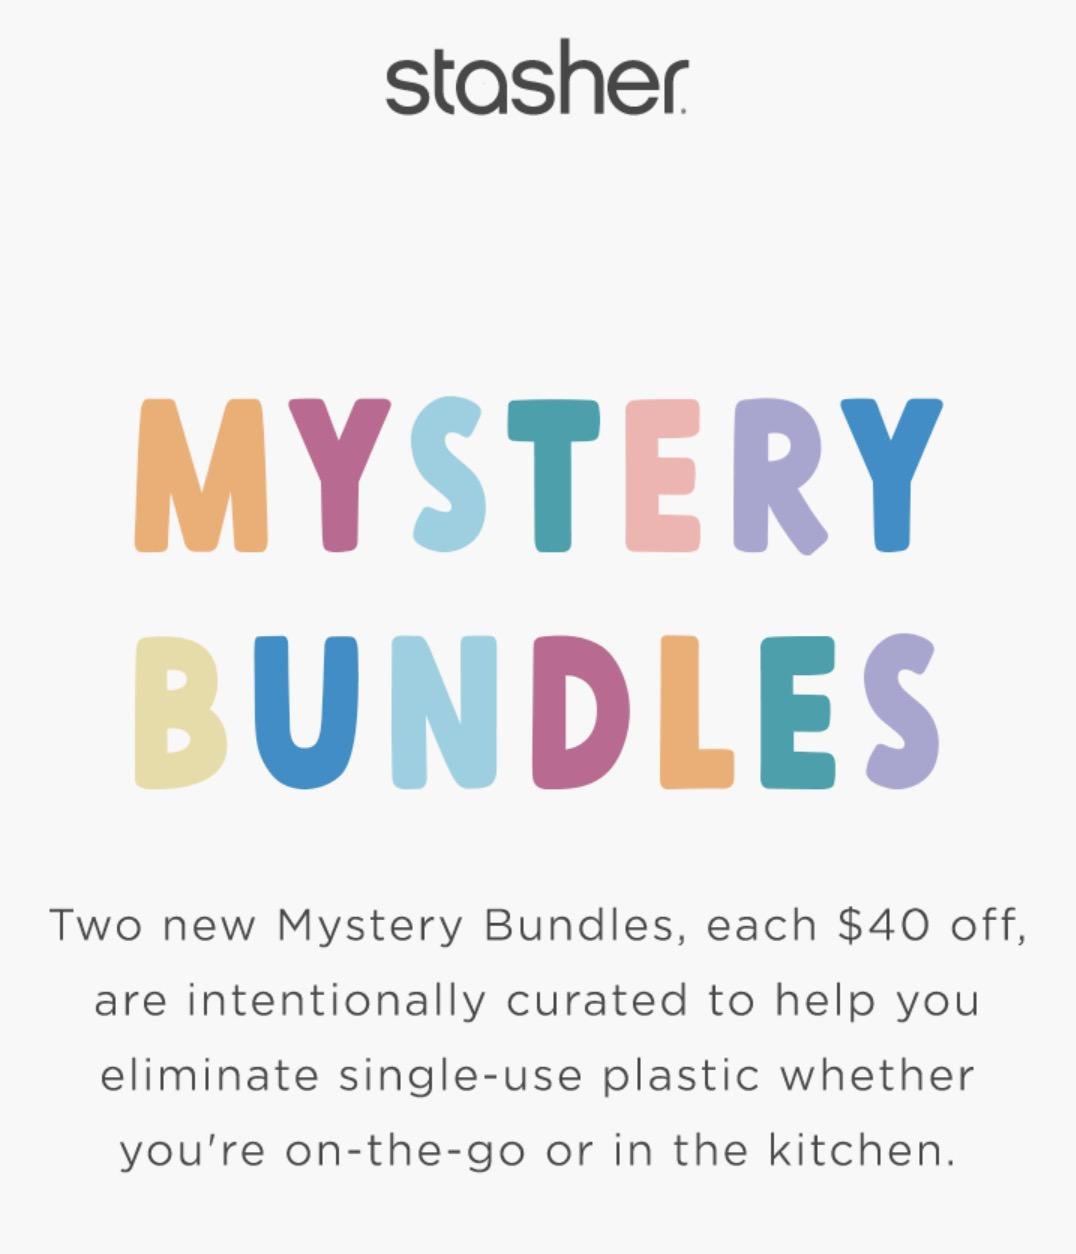 Stasher Mystery Bundles – Now Available